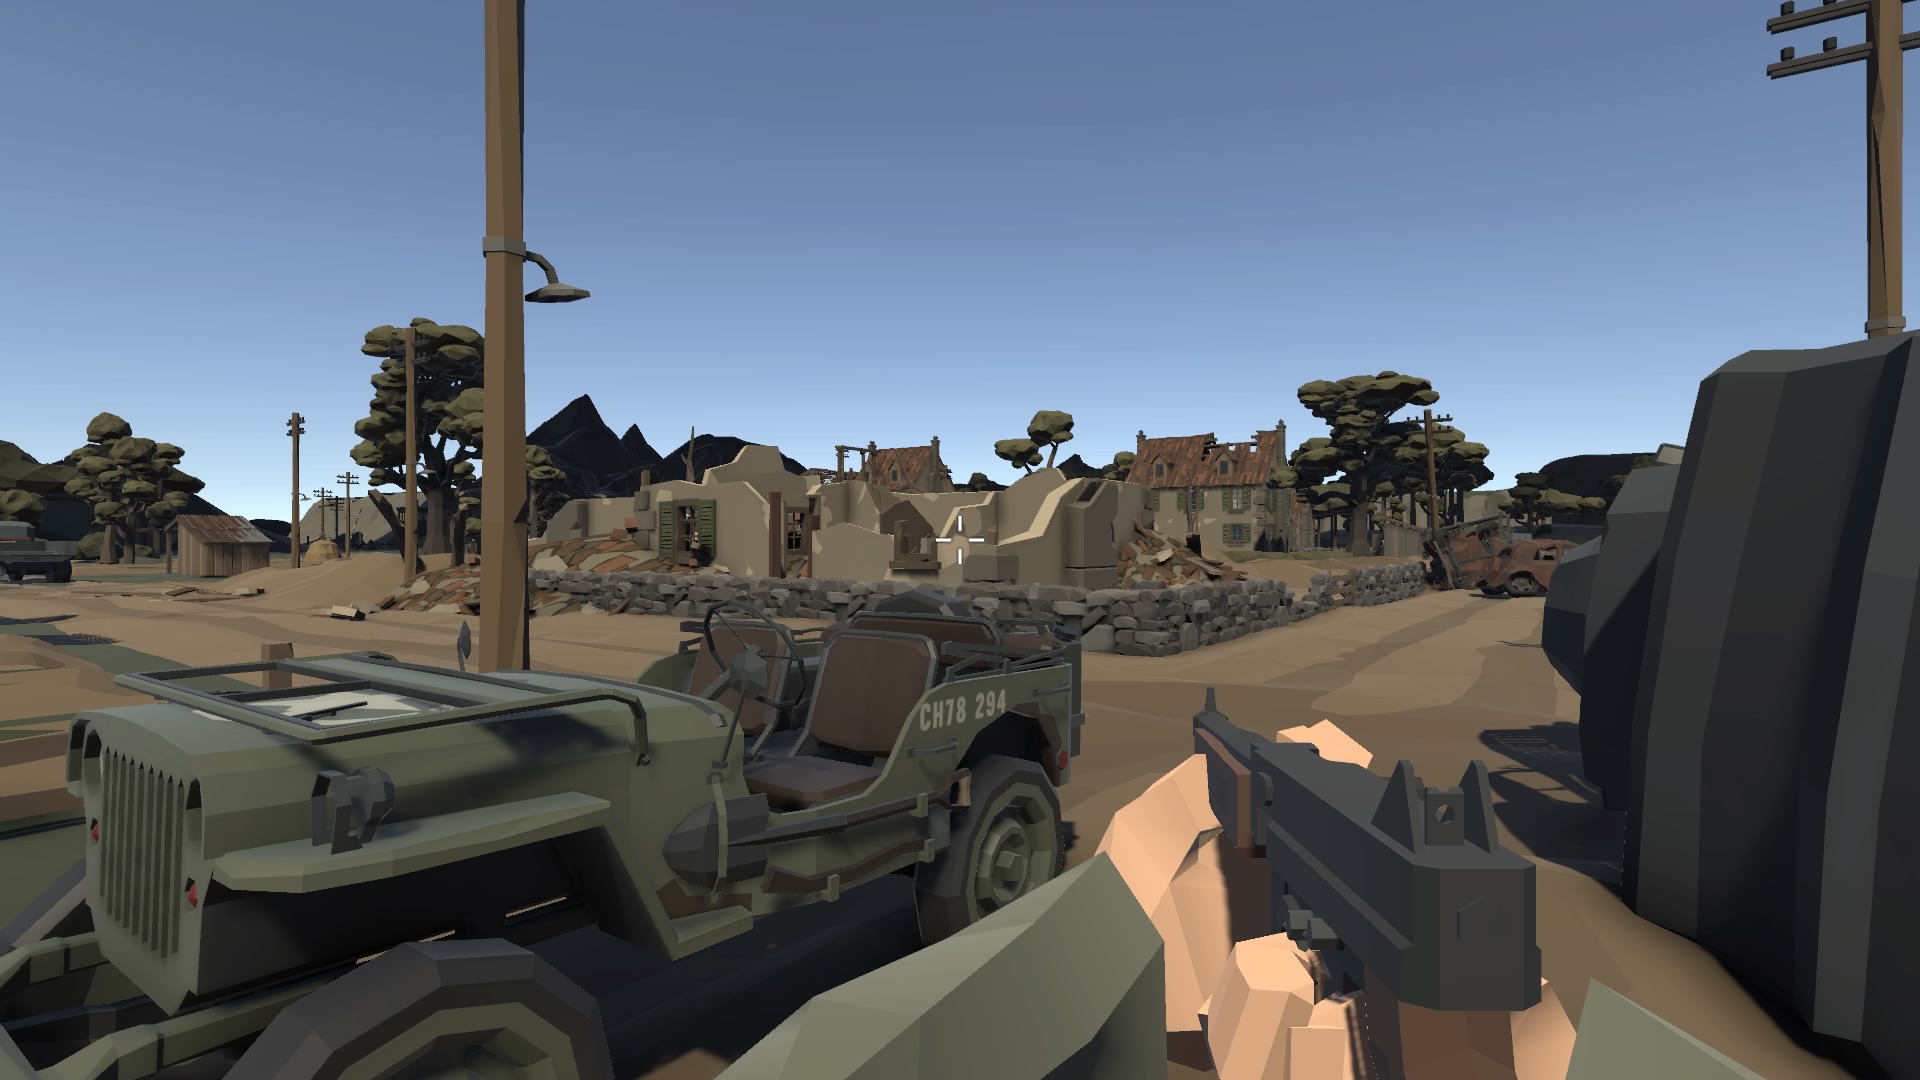 A player looking at a jeep in-game